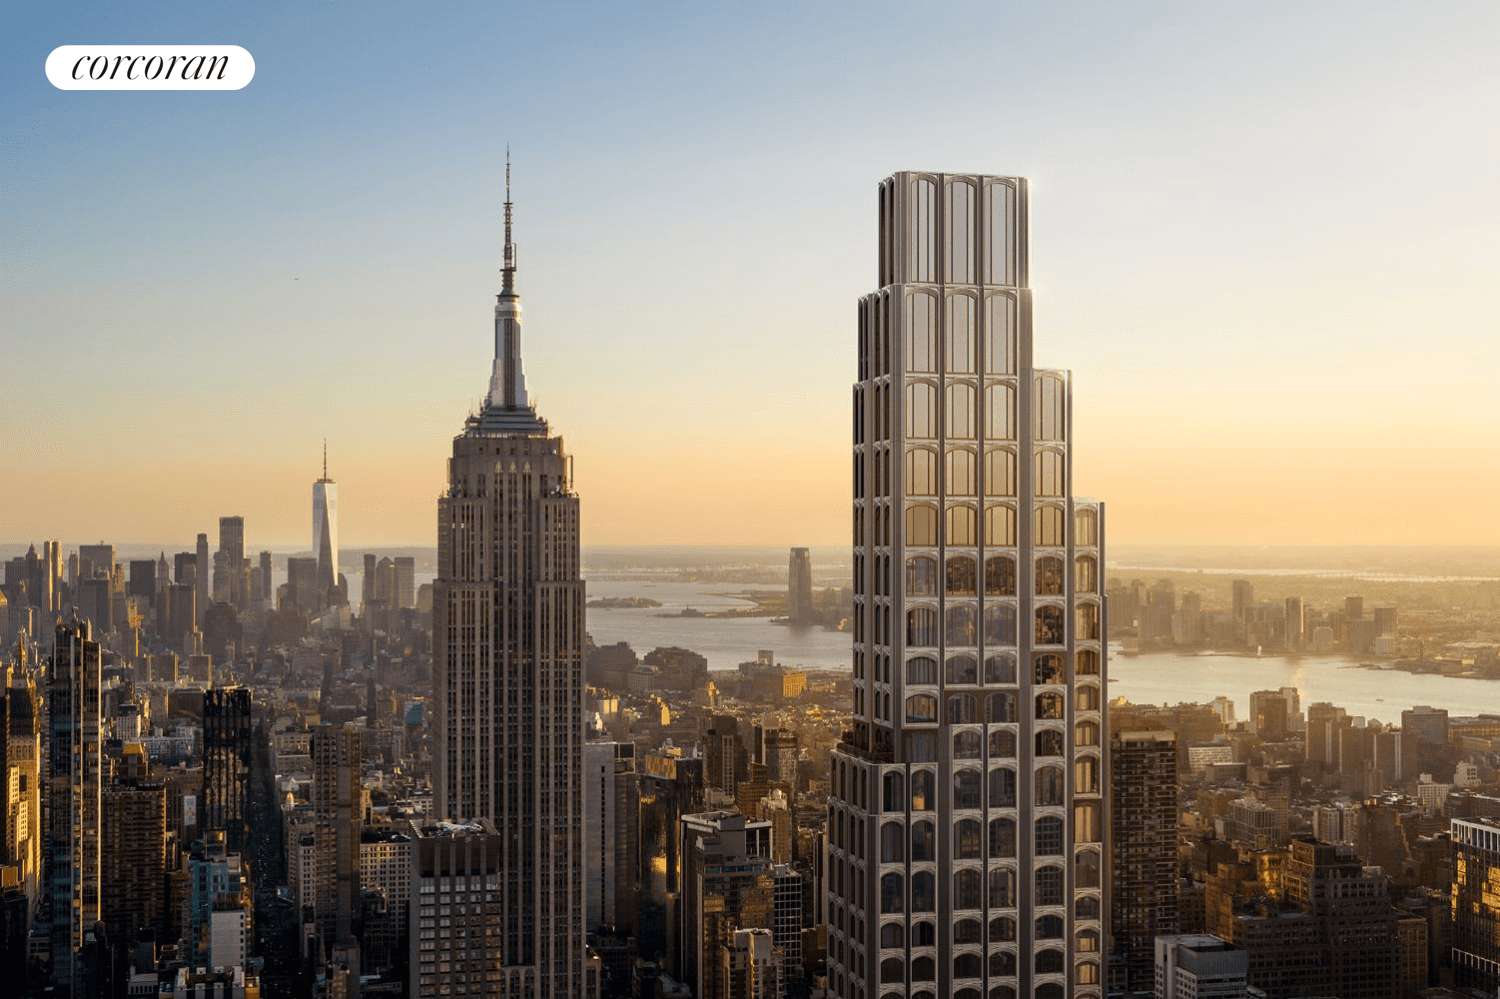 Penthouse 78 at 520 Fifth Avenue is a stunning full floor residence featuring panoramic views of the entire NYC skyline, including the Empire State Building, from river to river in ...